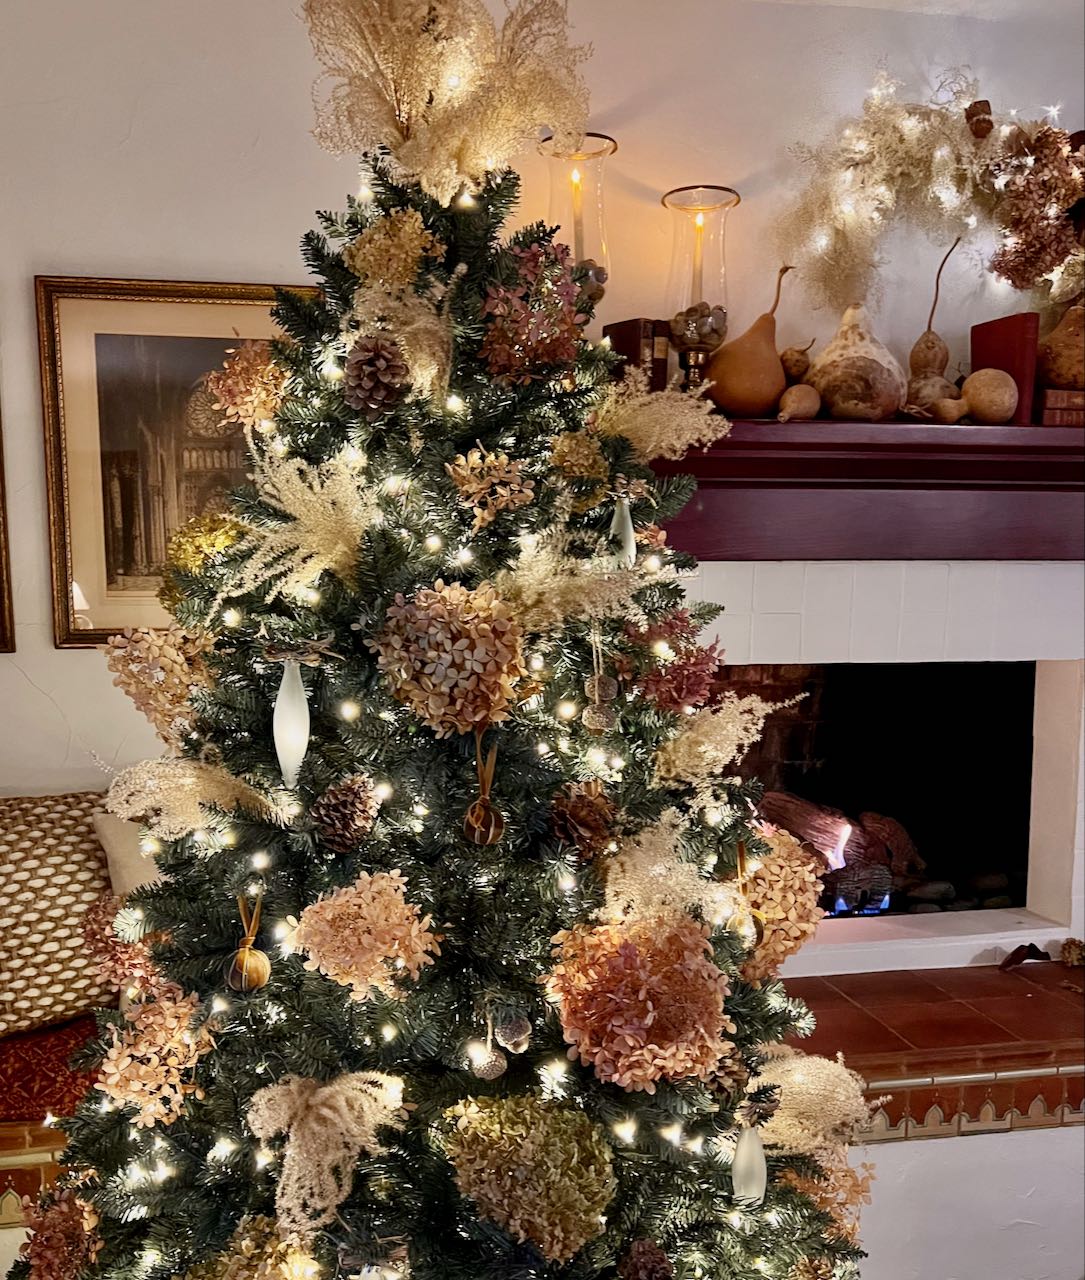 Christmas tree decorated with natural elements like the wall arrangement behind it